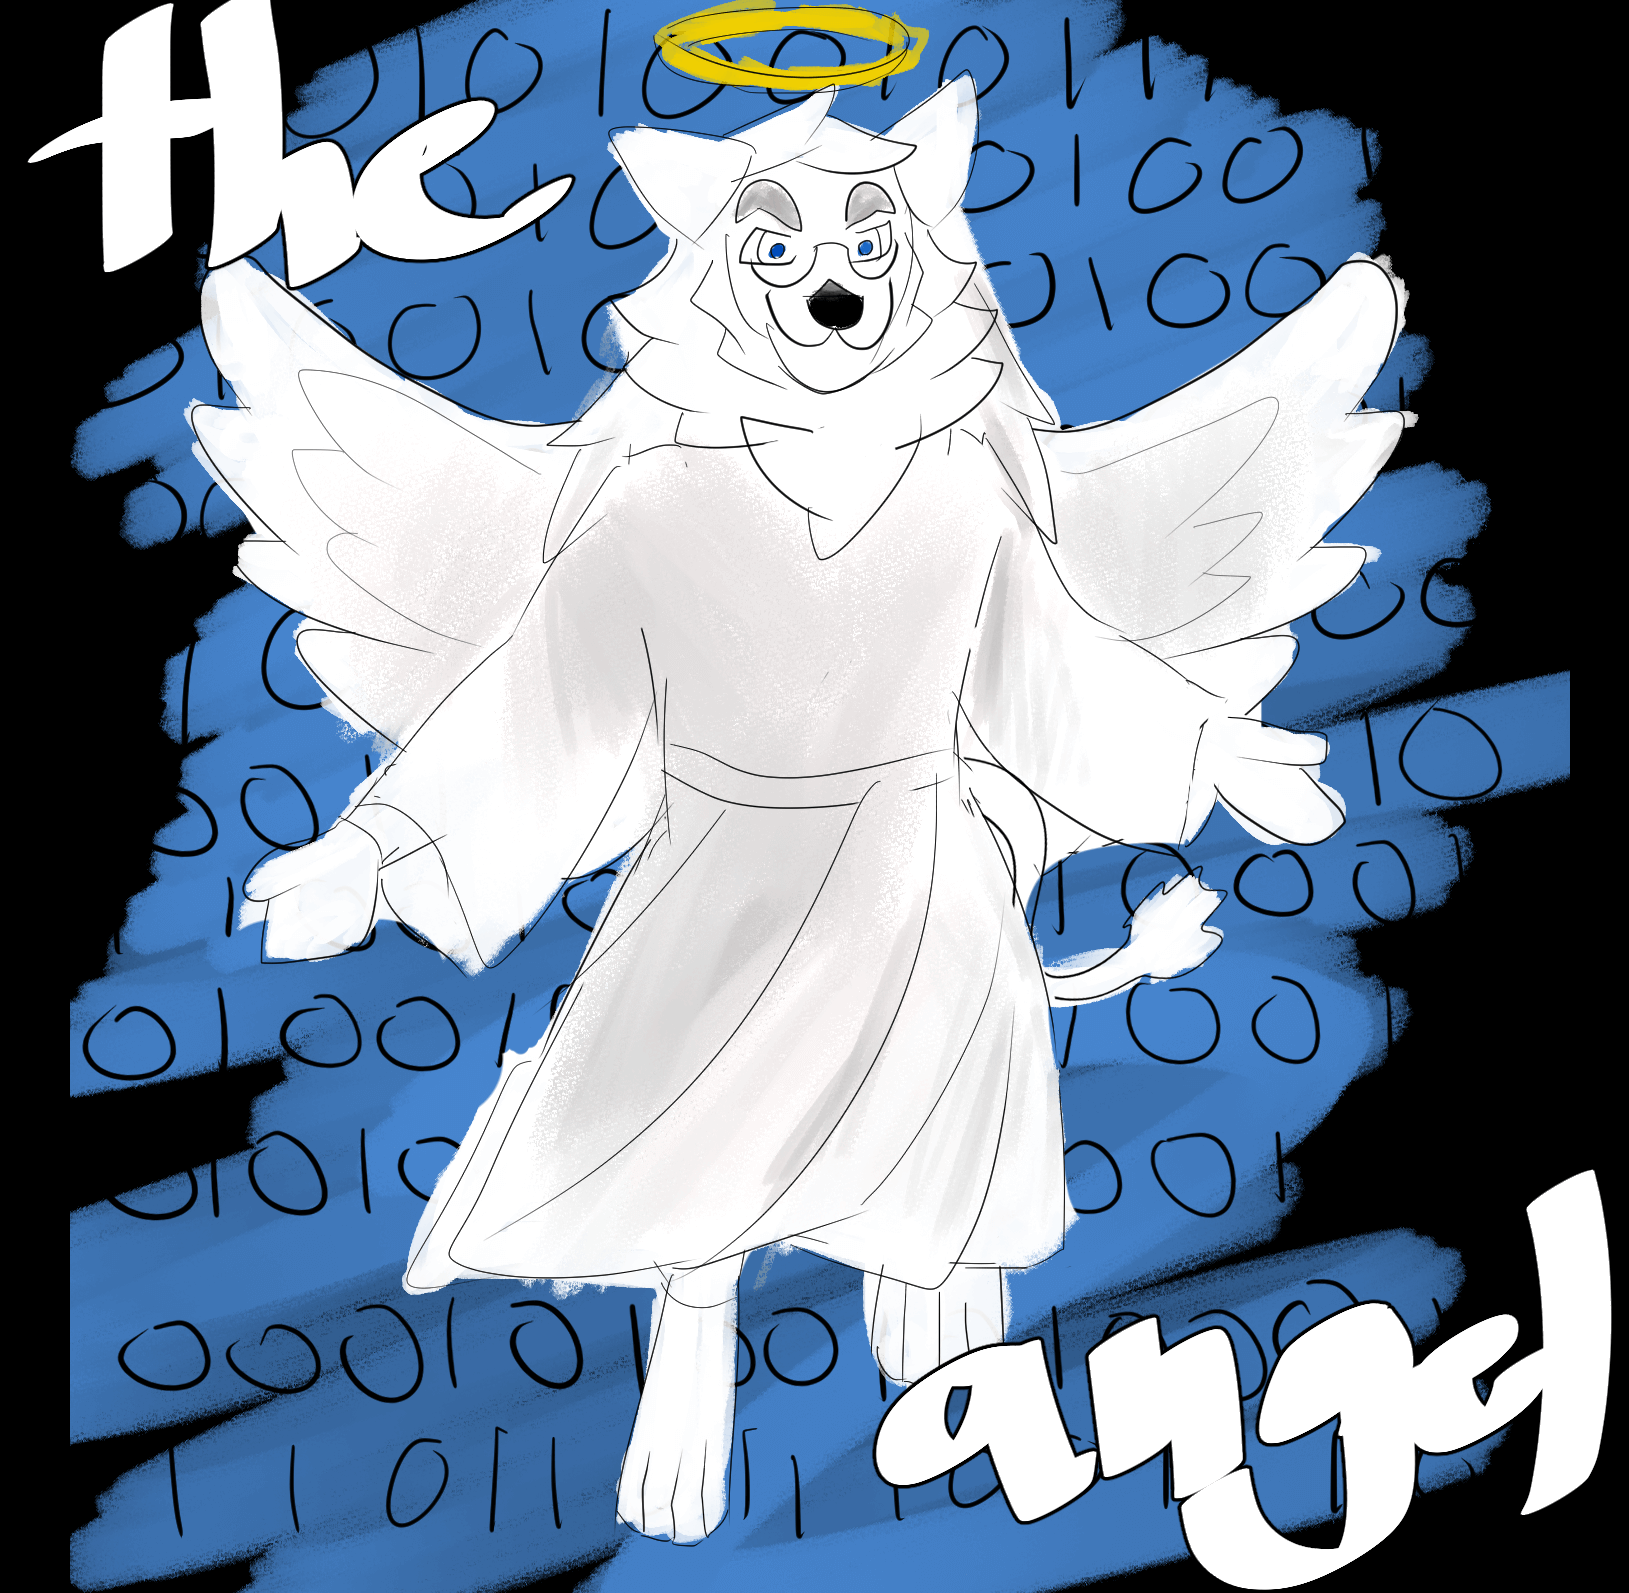 Lion with wings dressed as an angel floats, behind which lies binary code.